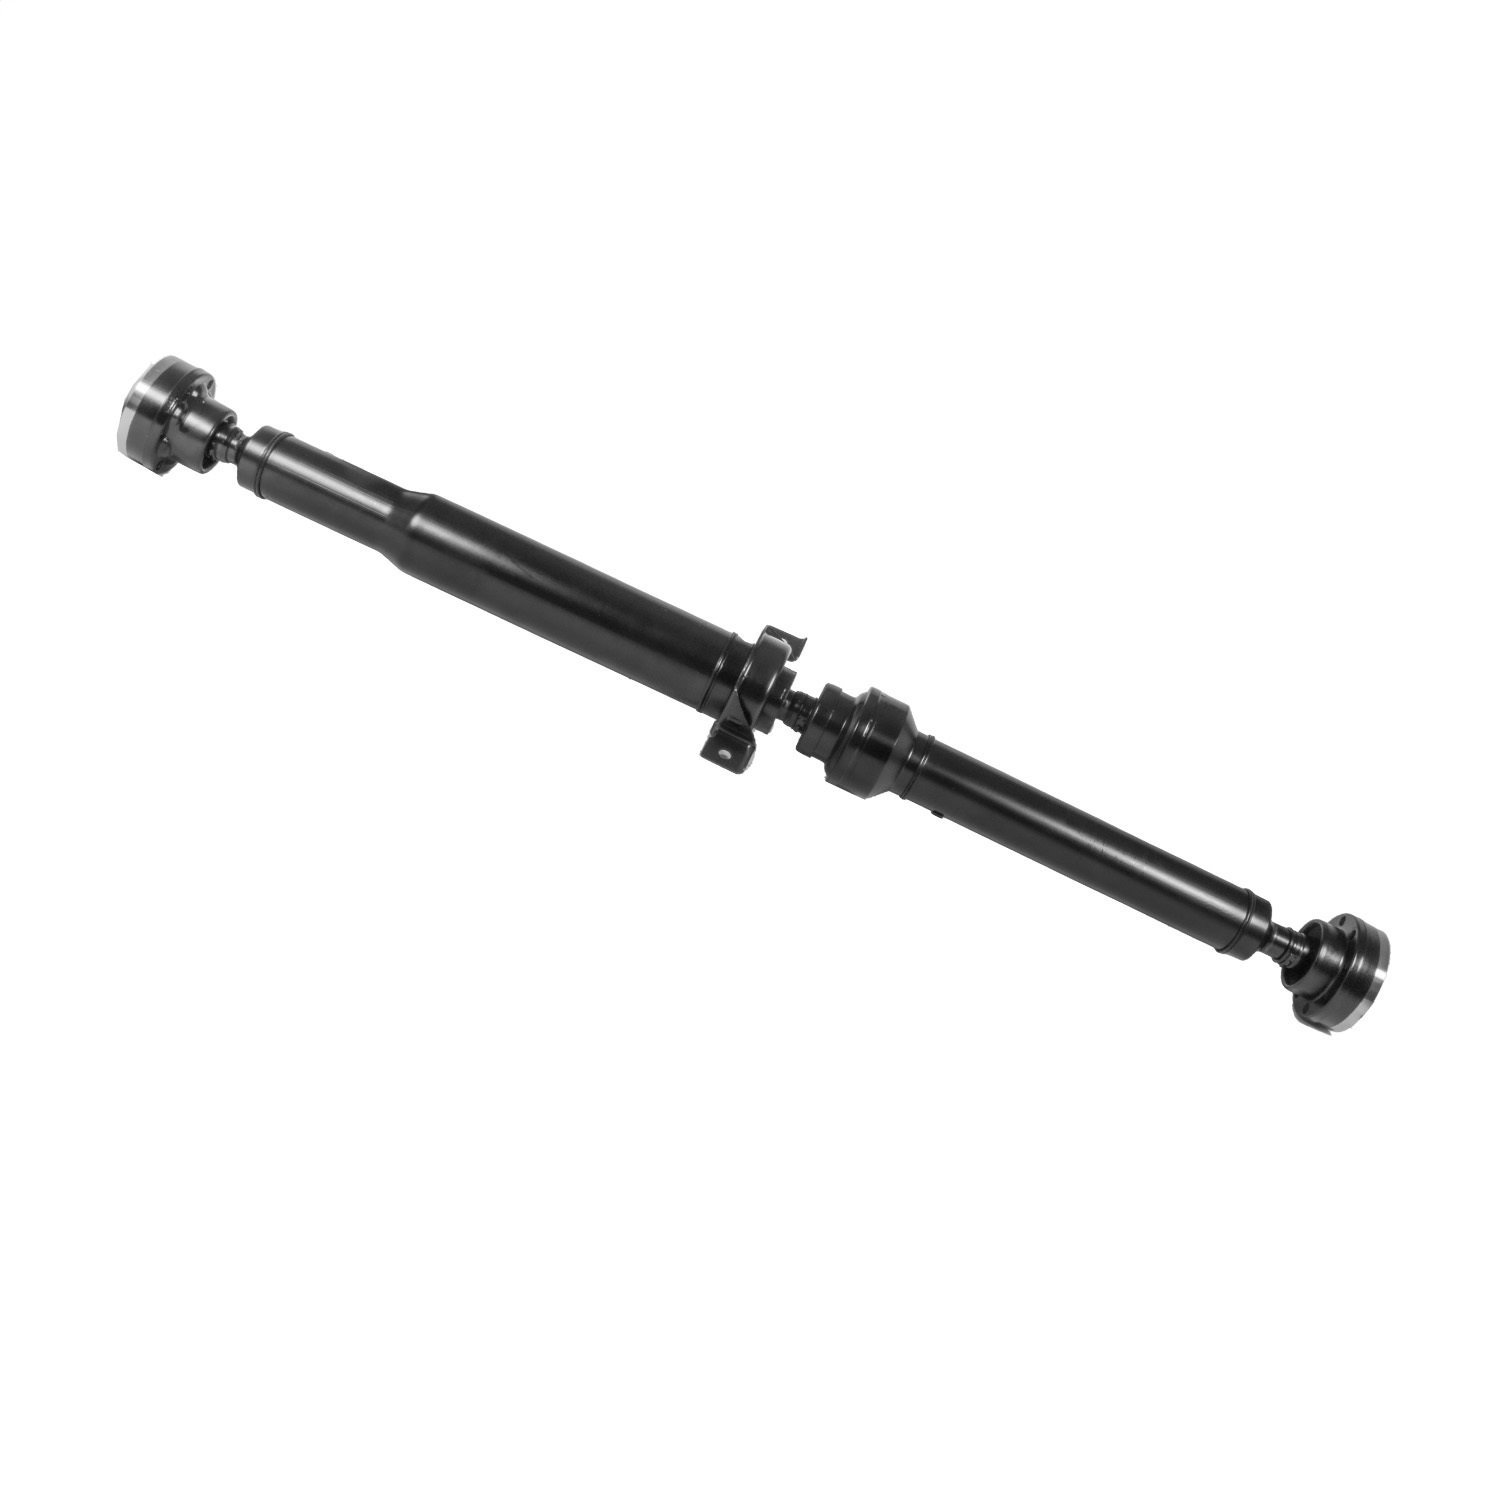 USA Standard ZDS106065 Gear Rear Driveshaft, For Jeep Cherokee, 88 in. Overall Length